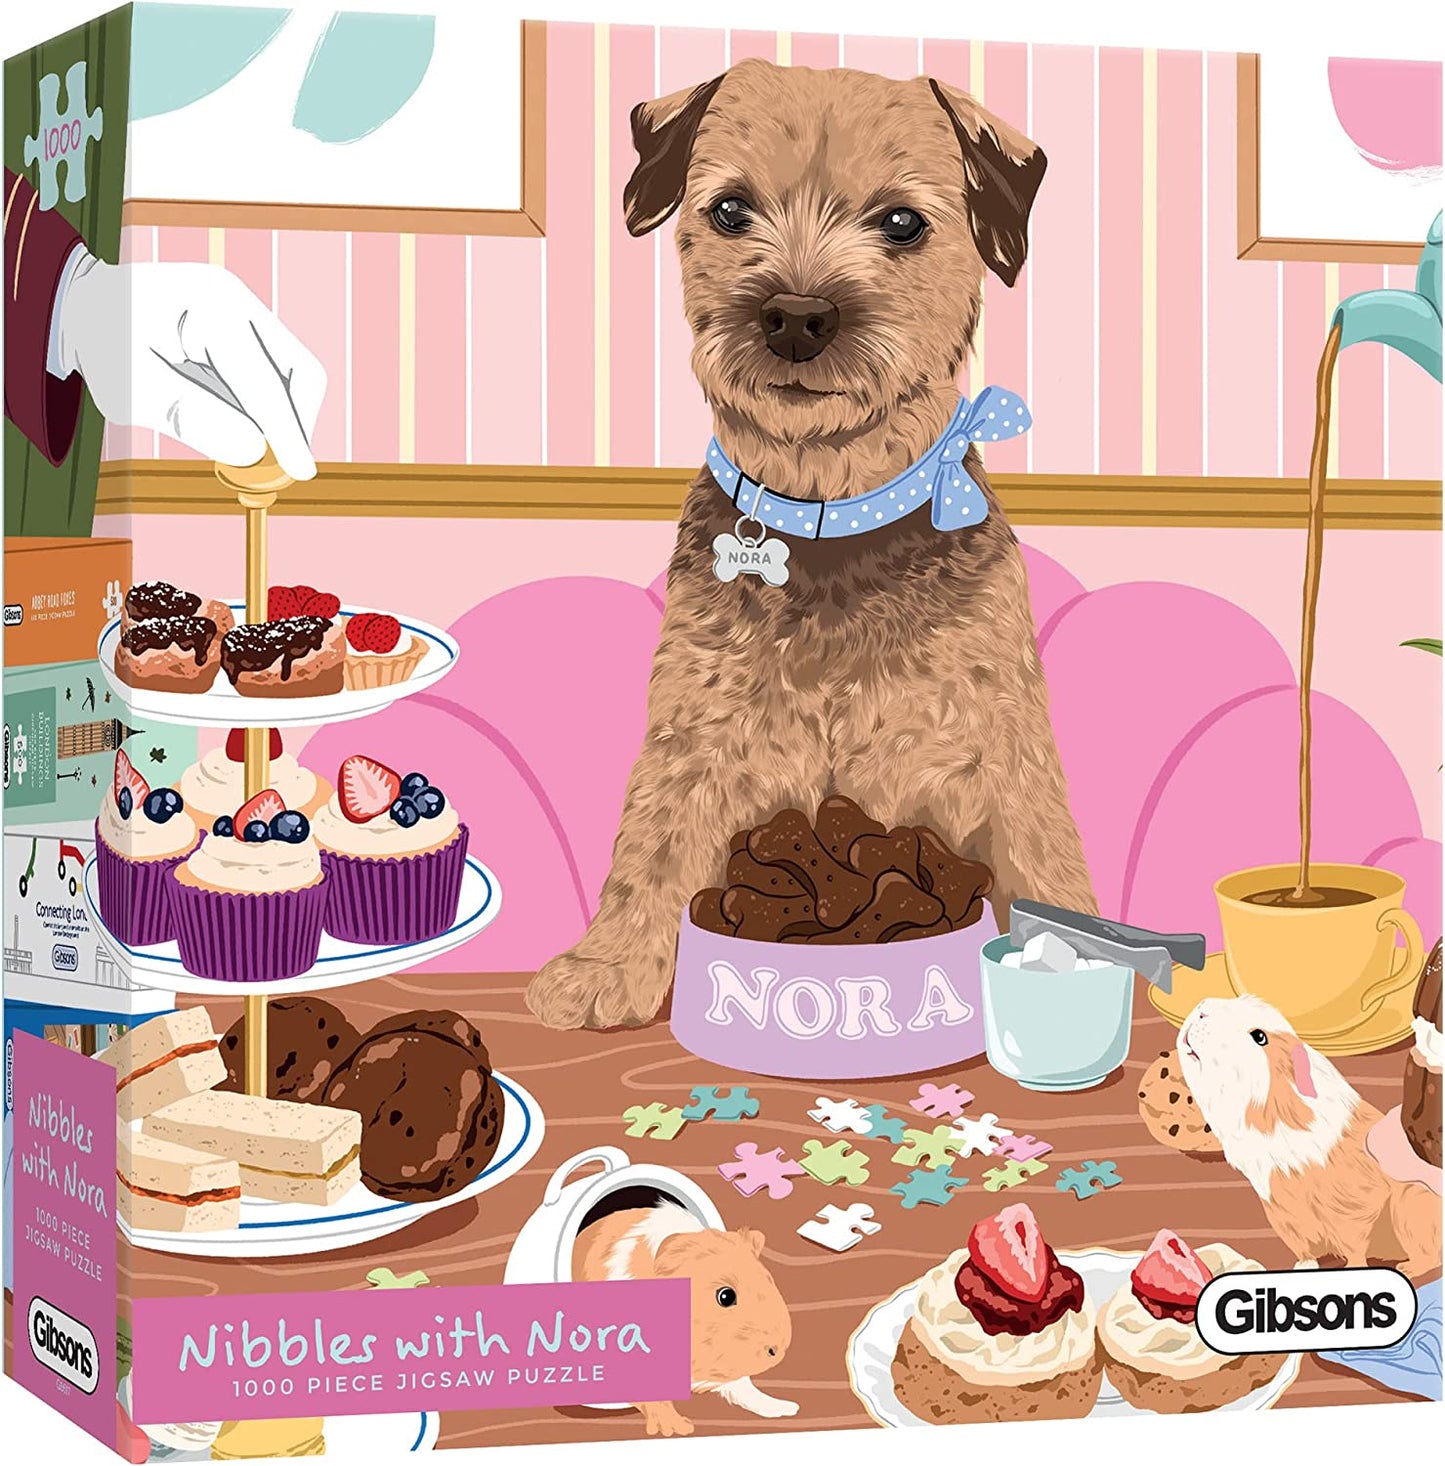 Gibsons - Nibbles with Nora - 1000 Piece Jigsaw Puzzle